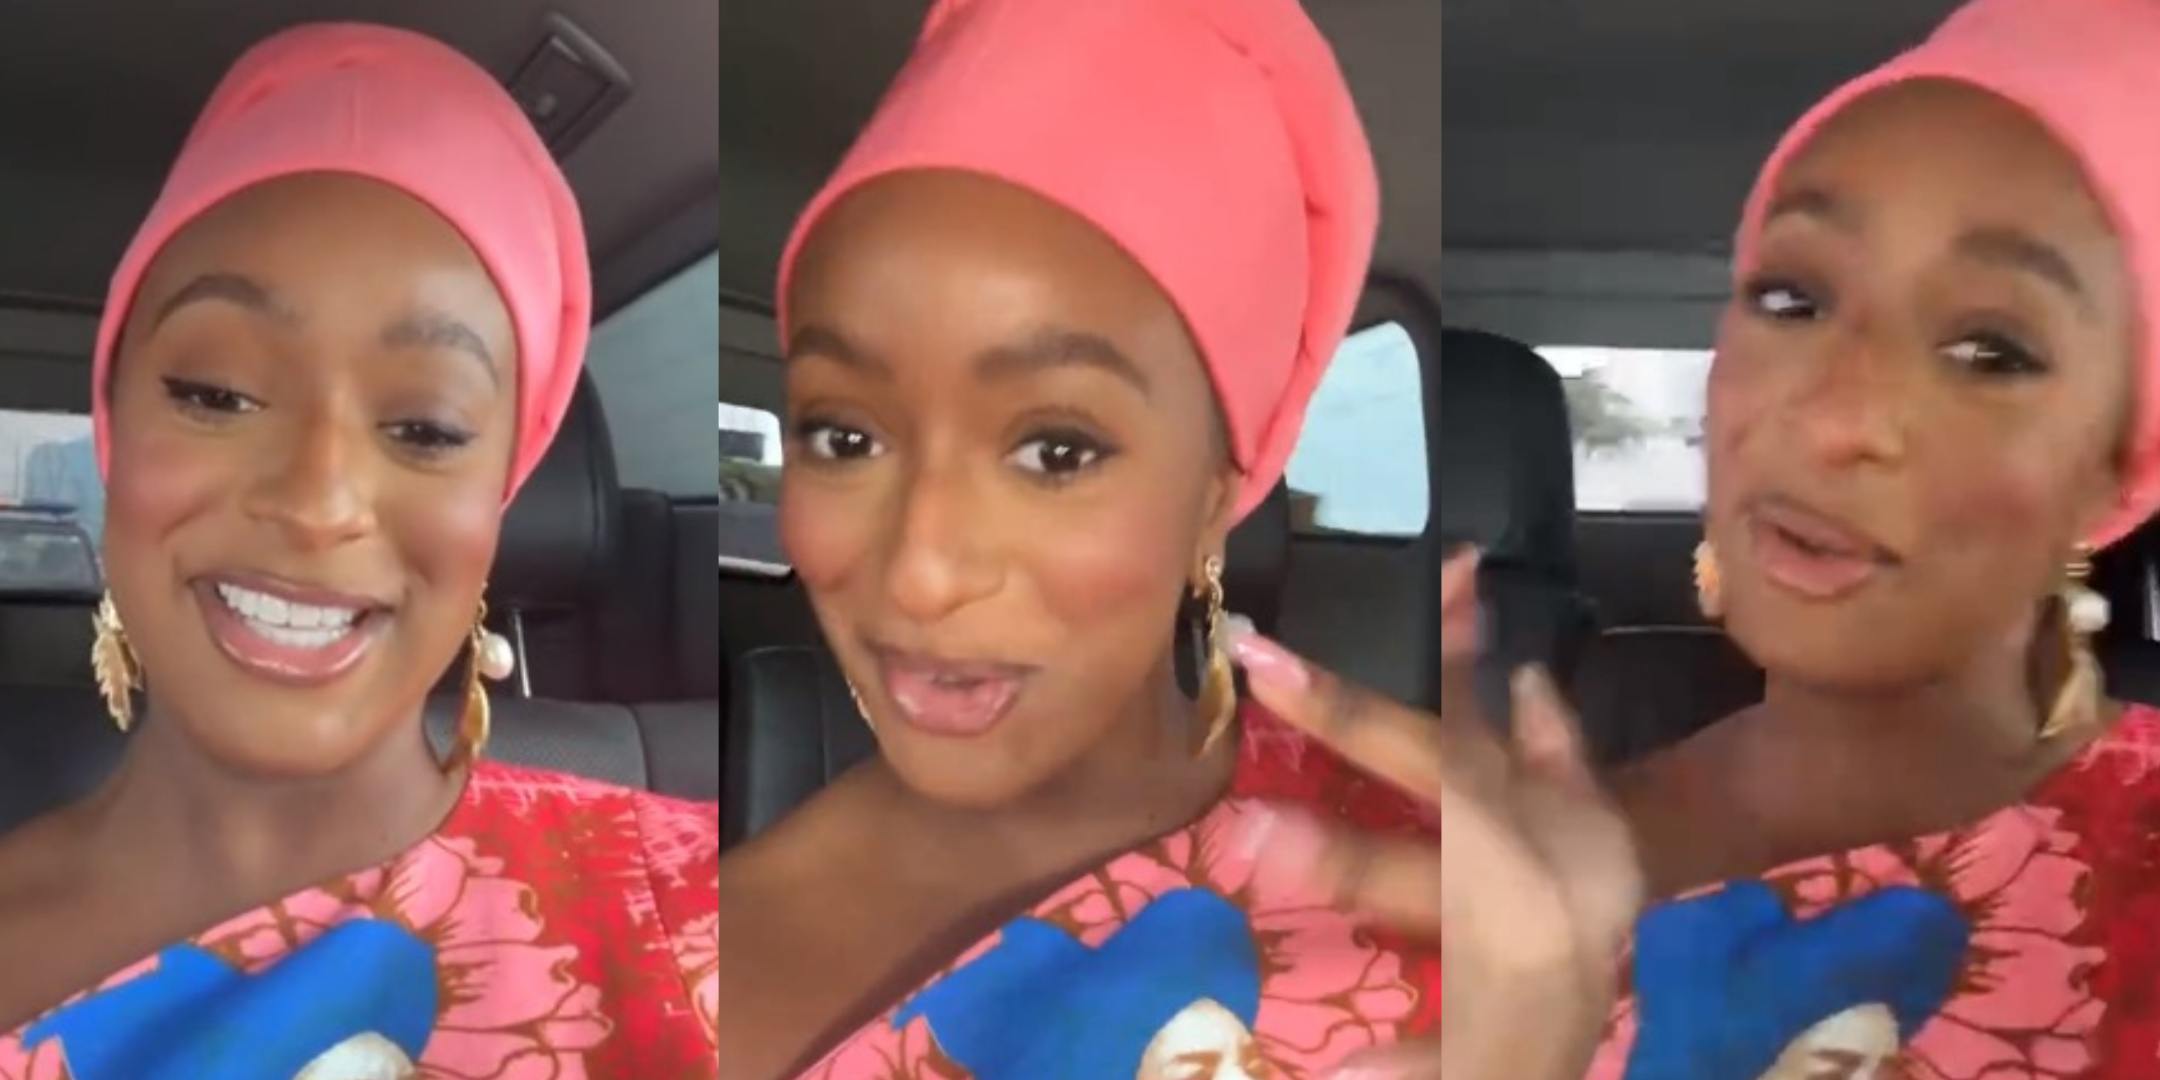 "Ain't no party like a Lagos party" – Cuppy excited as she returns to Nigeria, reels off fluent Yoruba